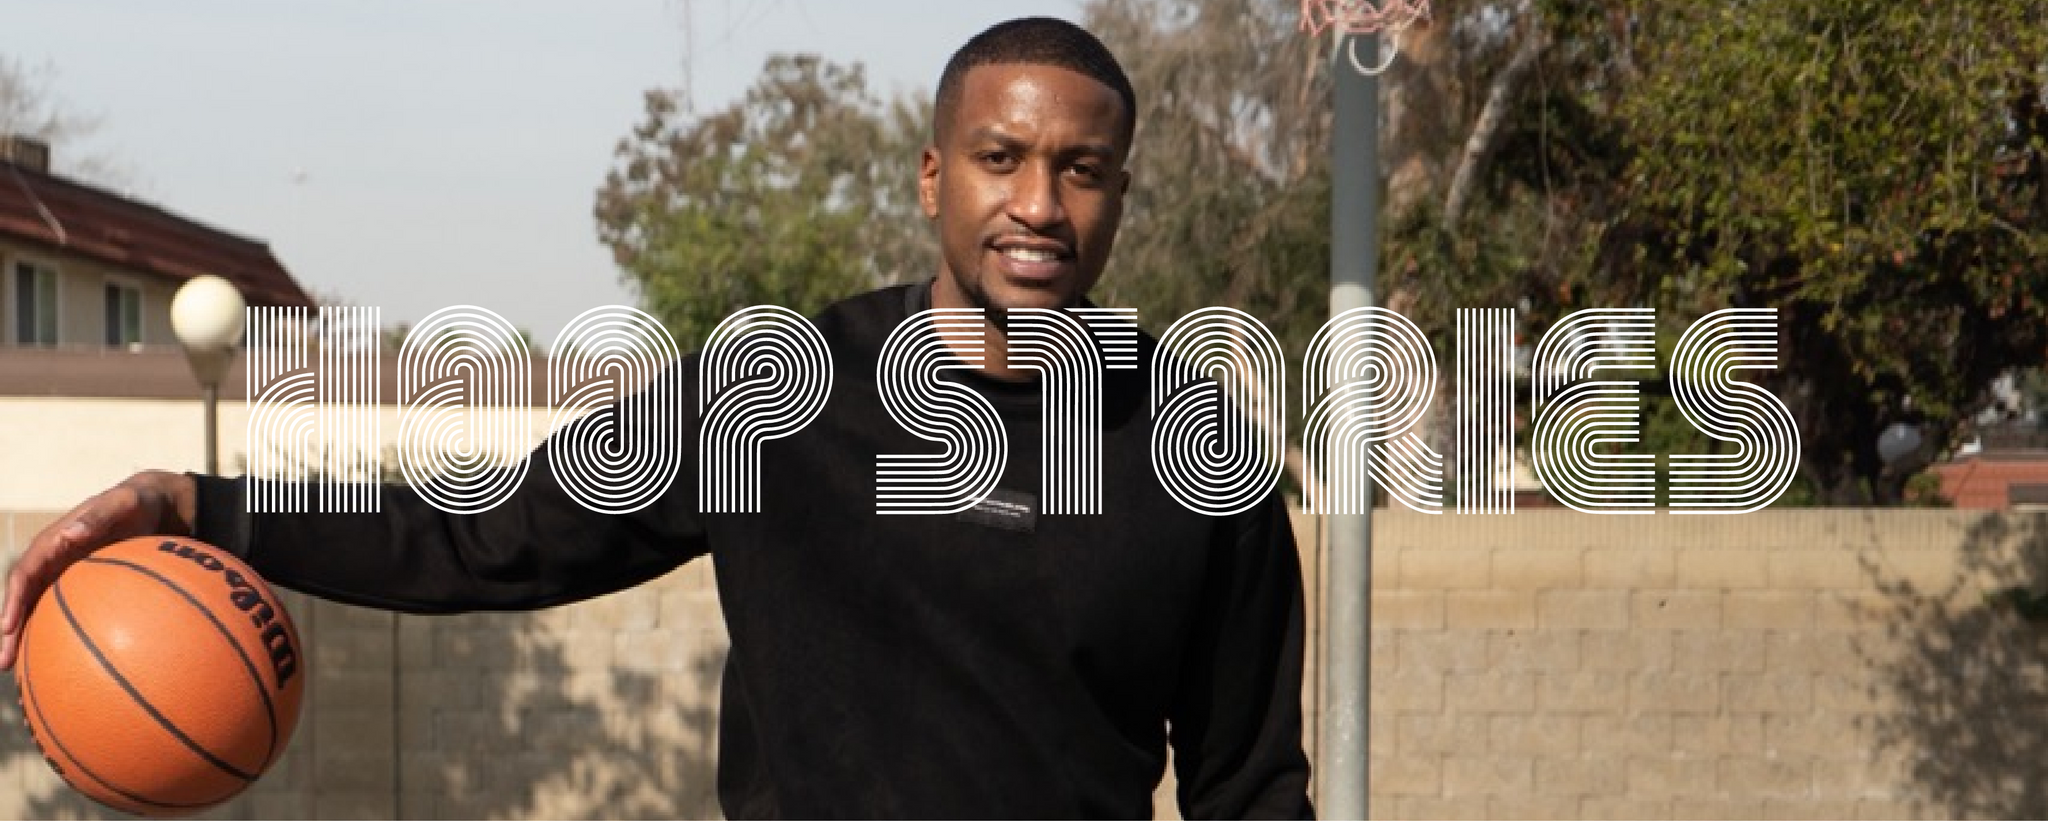 Anthony Goods, Creator of Swish Cultures | Hoop Story #083